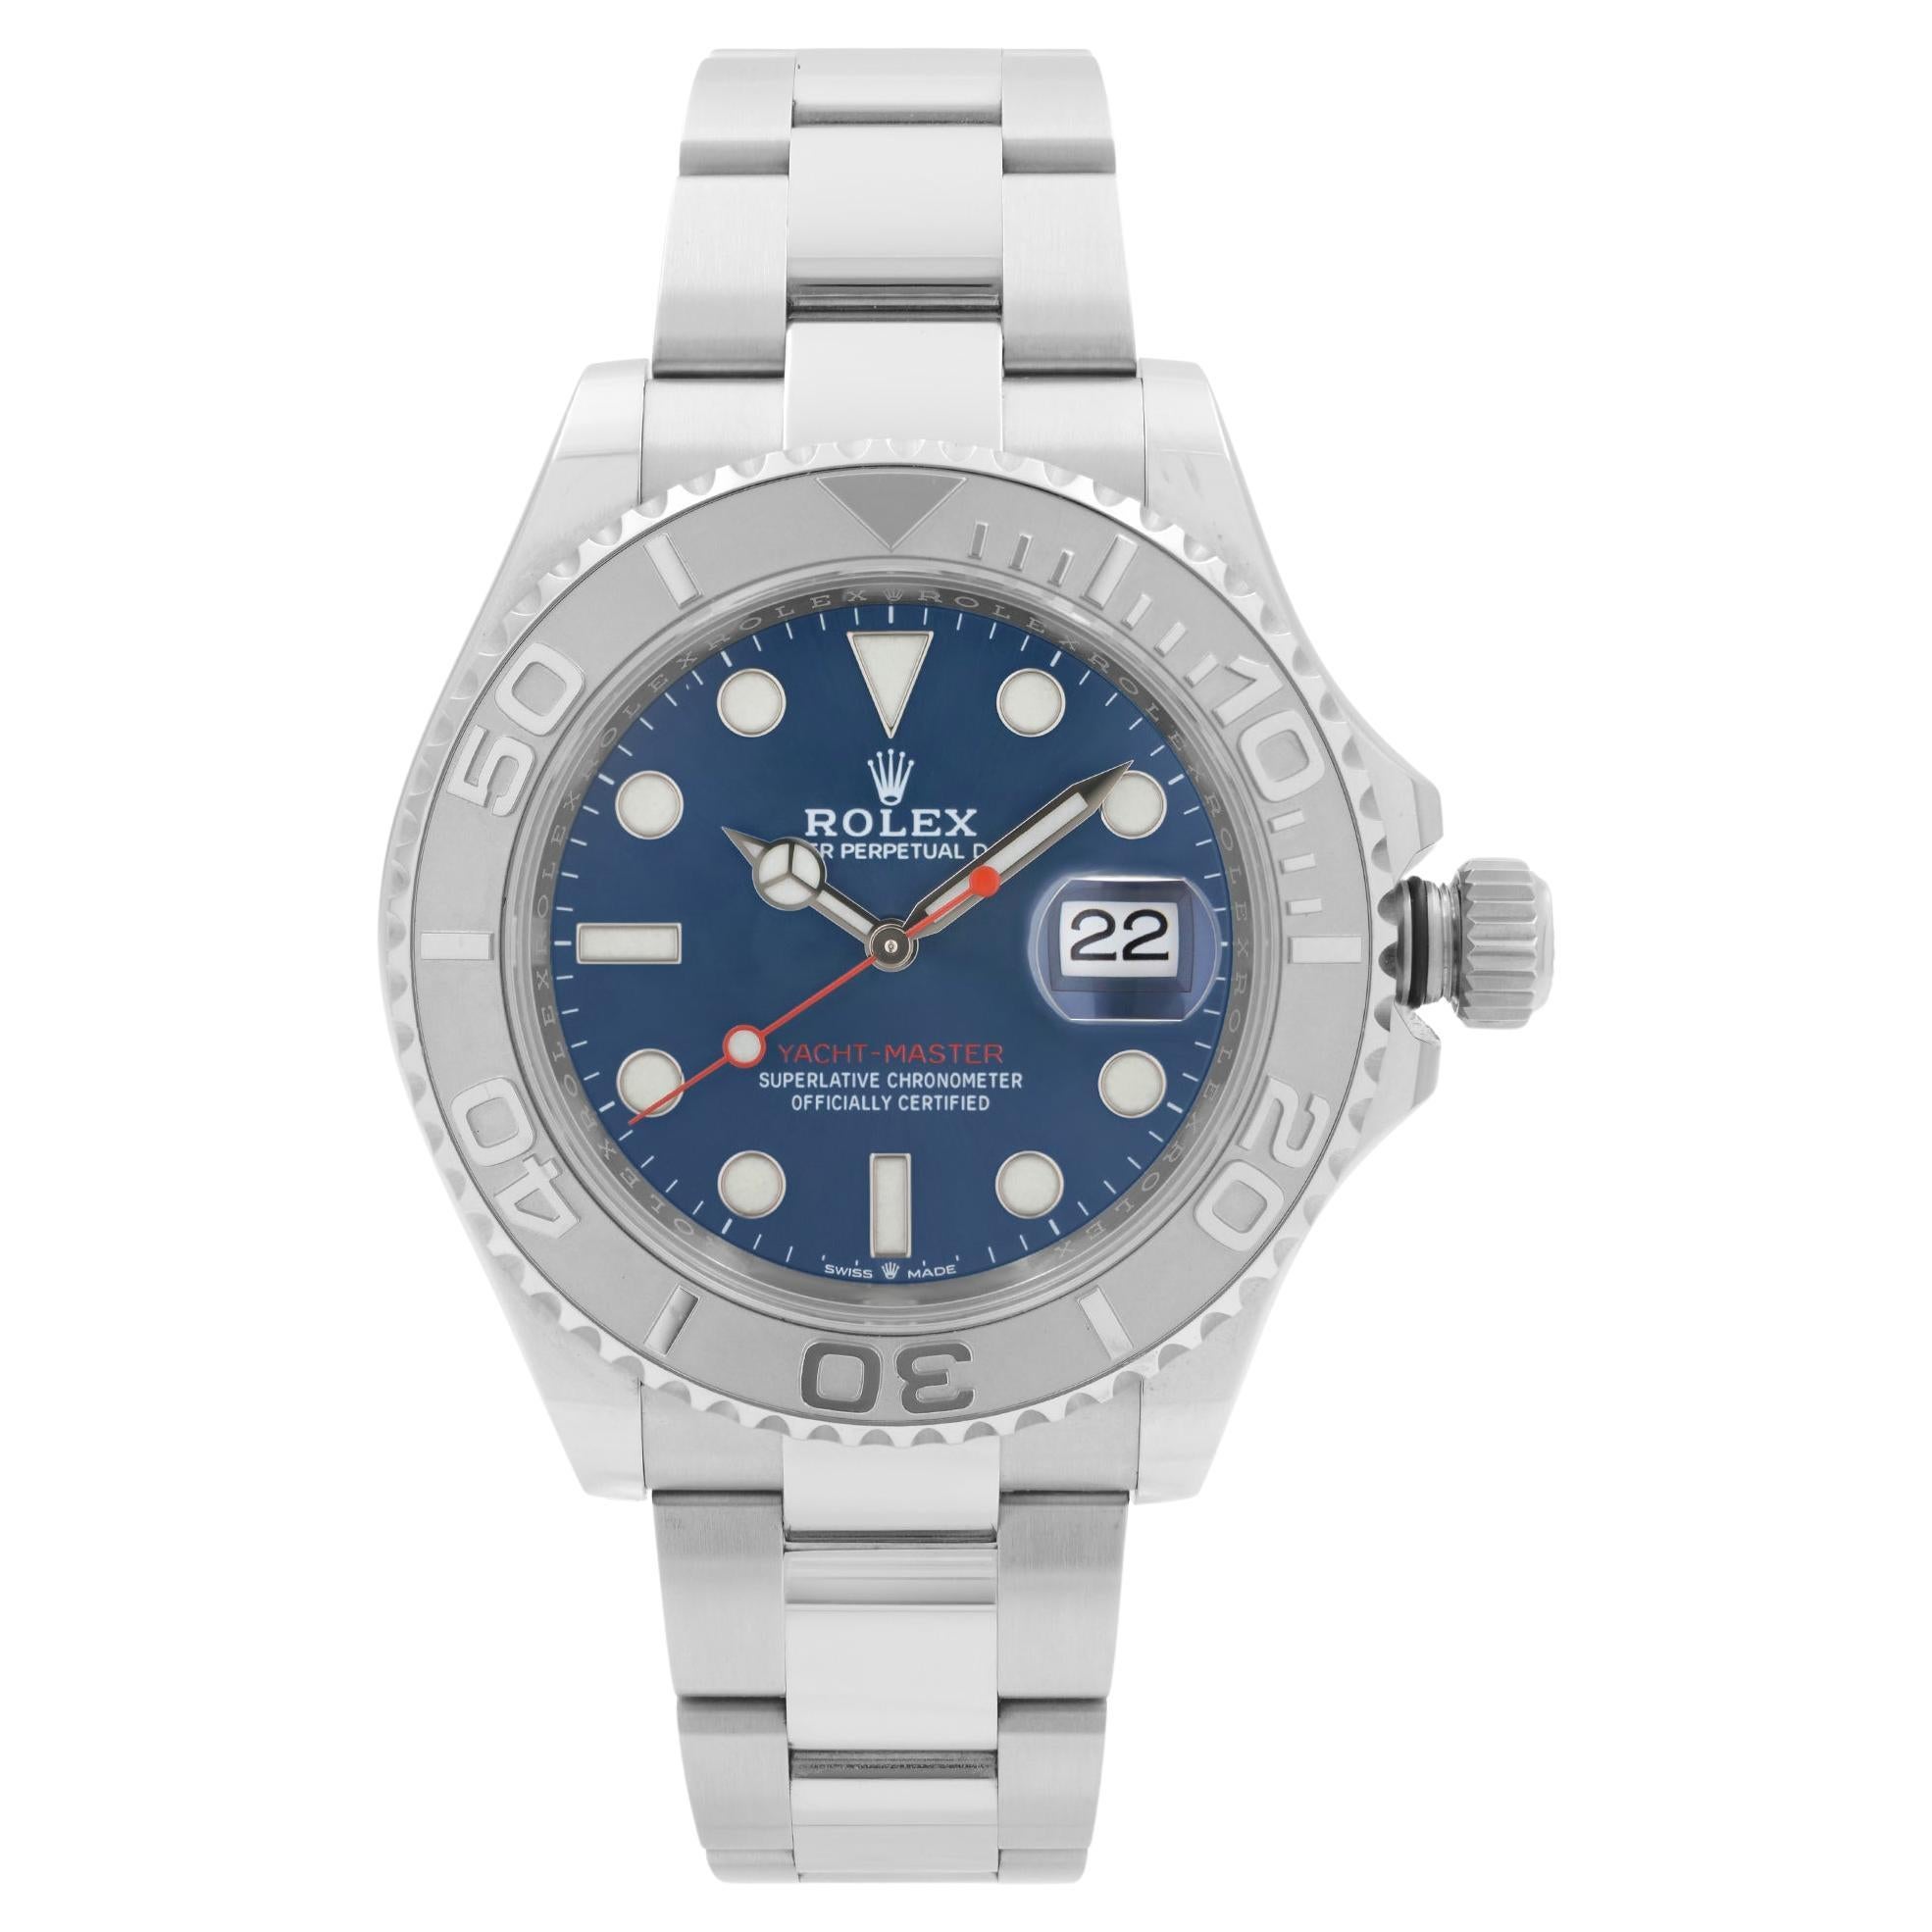 NEW Rolex Yacht-Master Steel Platinum Blue Dial Automatic Mens Watch 126622